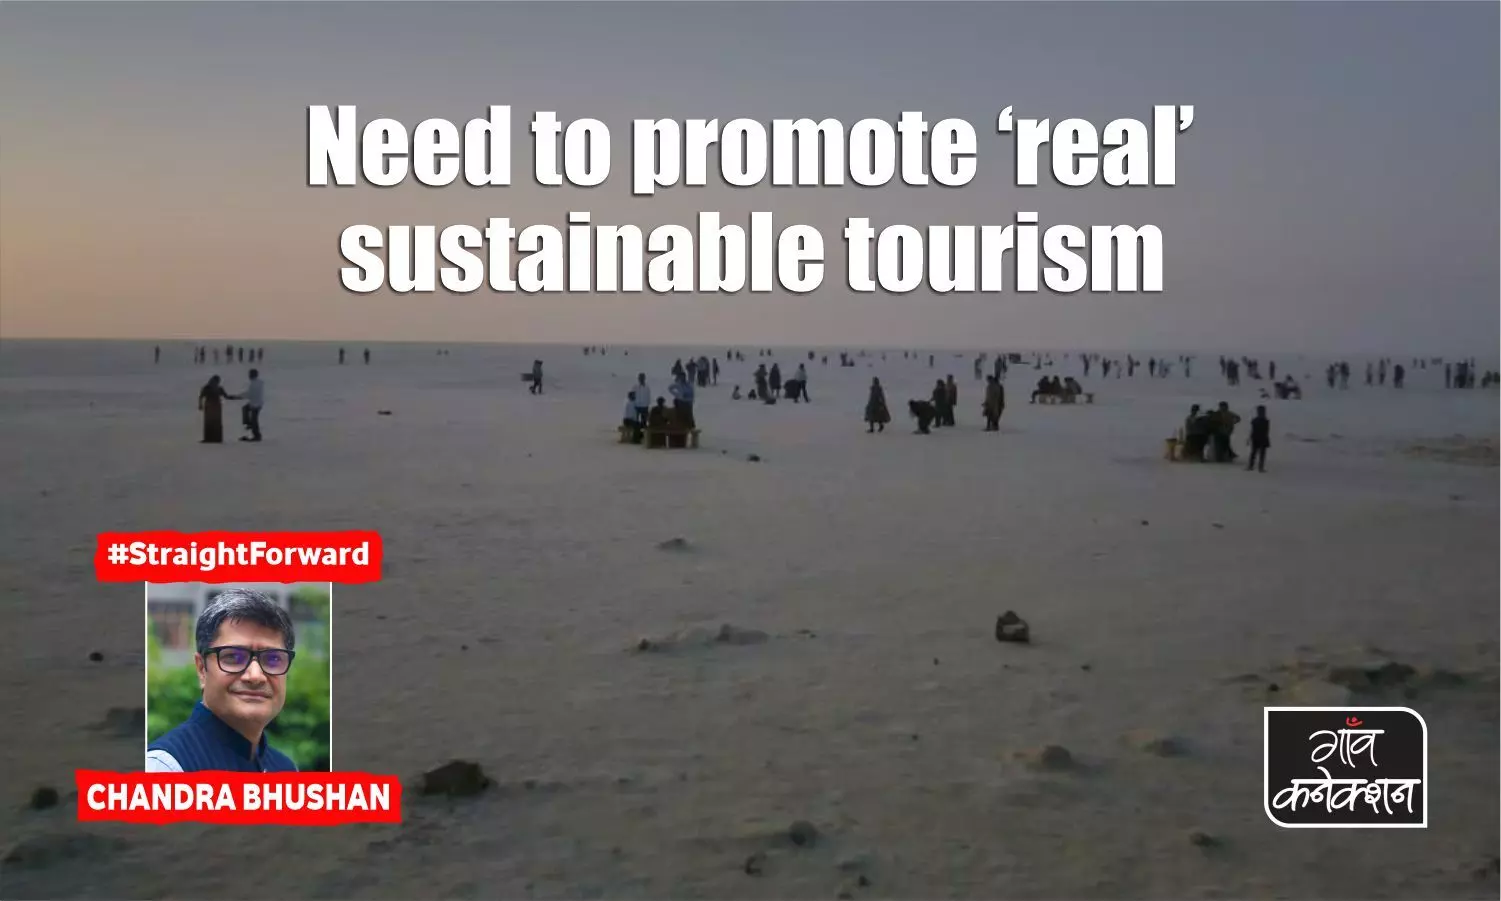 Several tourist places in India have exceeded their carrying capacity